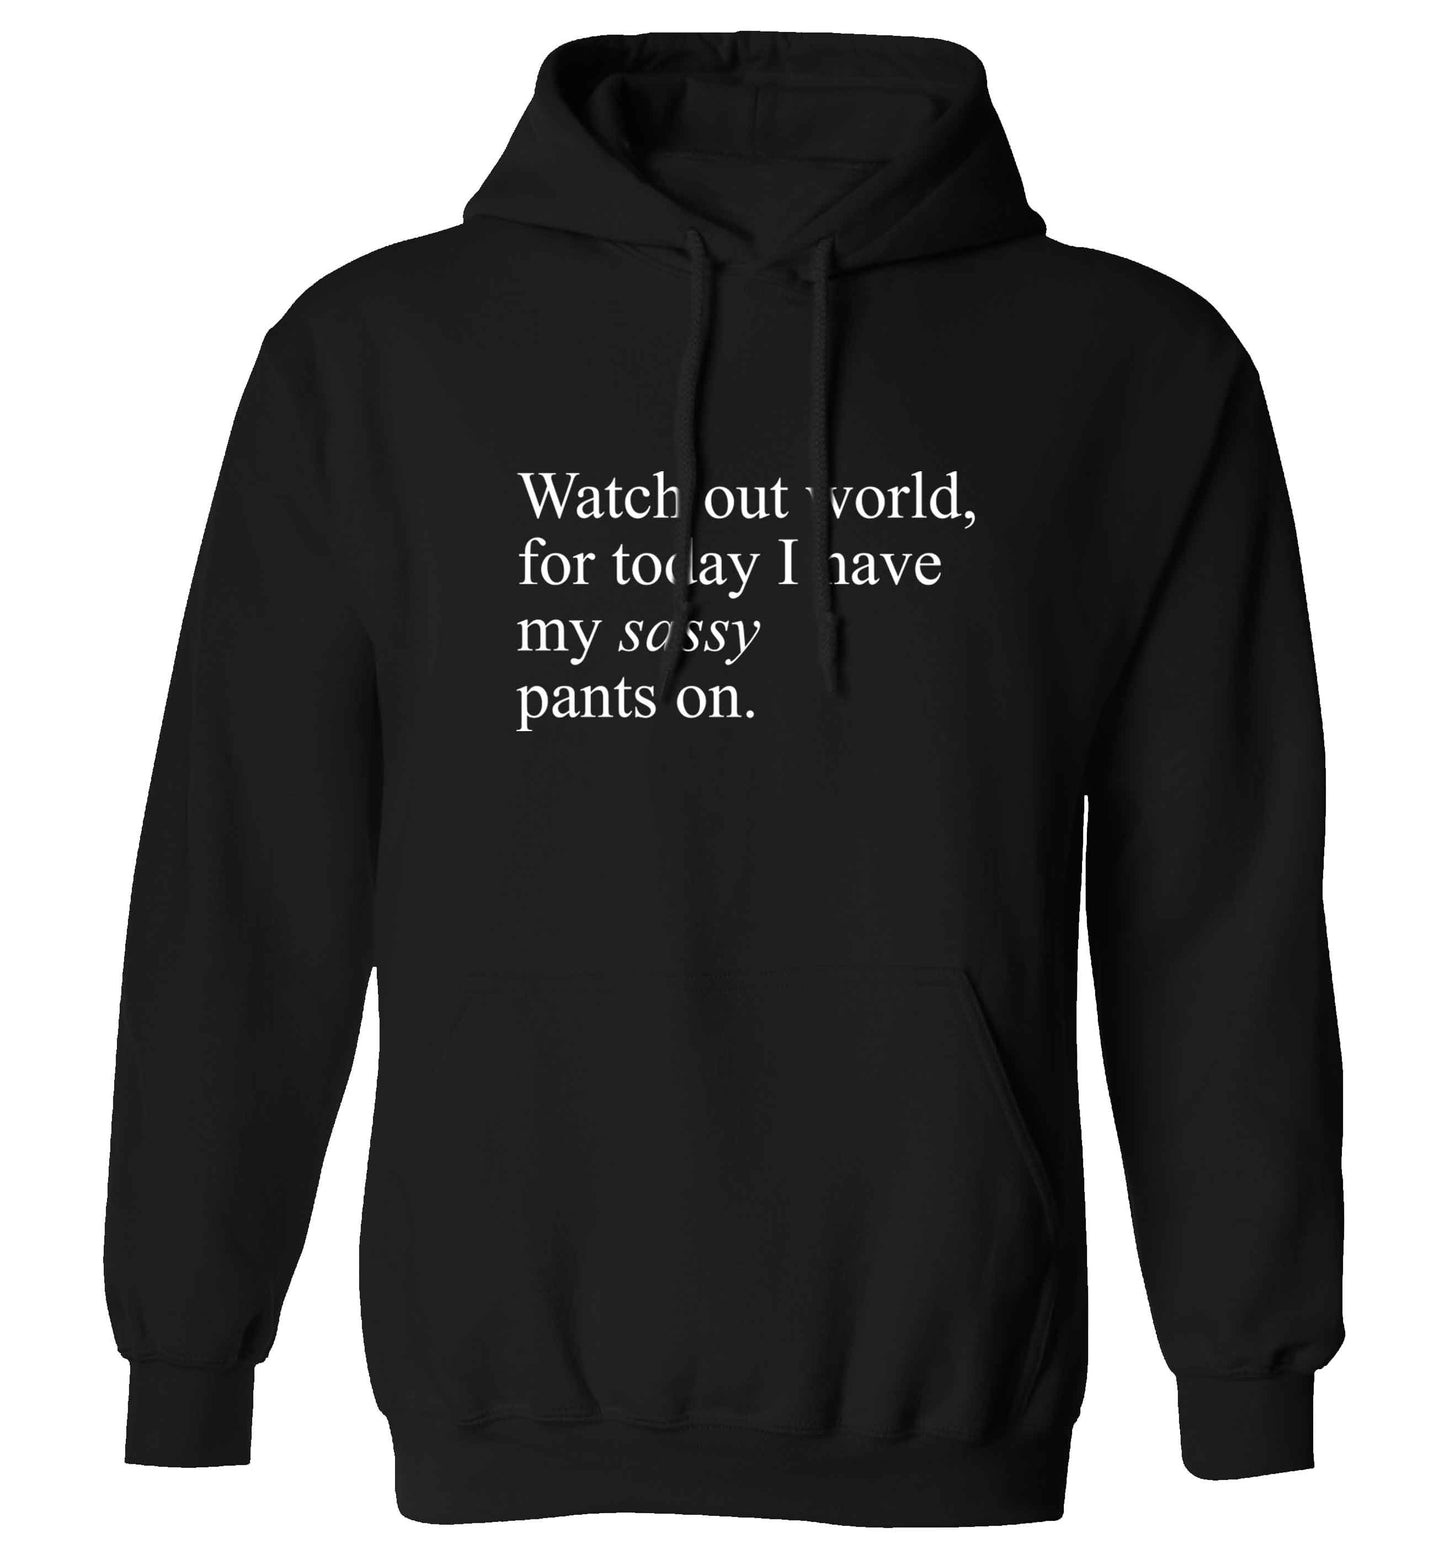 Watch out world for today I have my sassy pants on adults unisex black hoodie 2XL